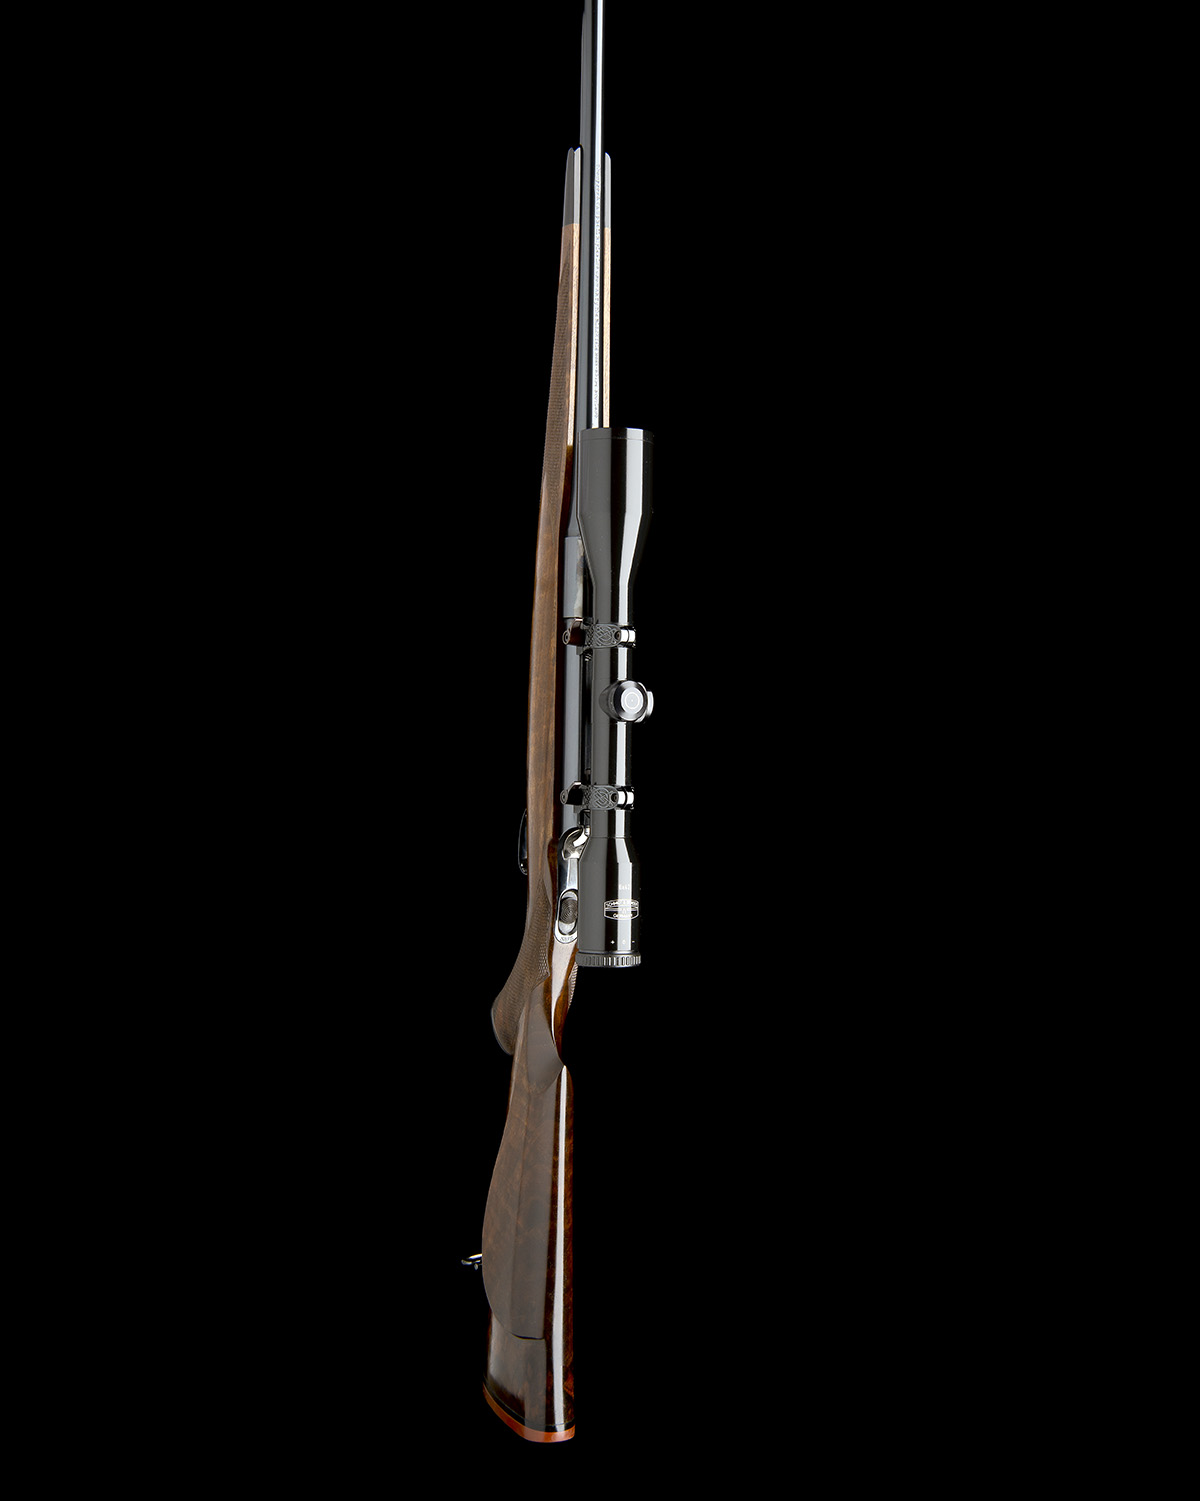 THOMPSON & CAMPBELL RIFLES LTD. A .270 WIN. BOLT-MAGAZINE SPORTING RIFLE, serial no. 98003, 24in. - Image 8 of 8